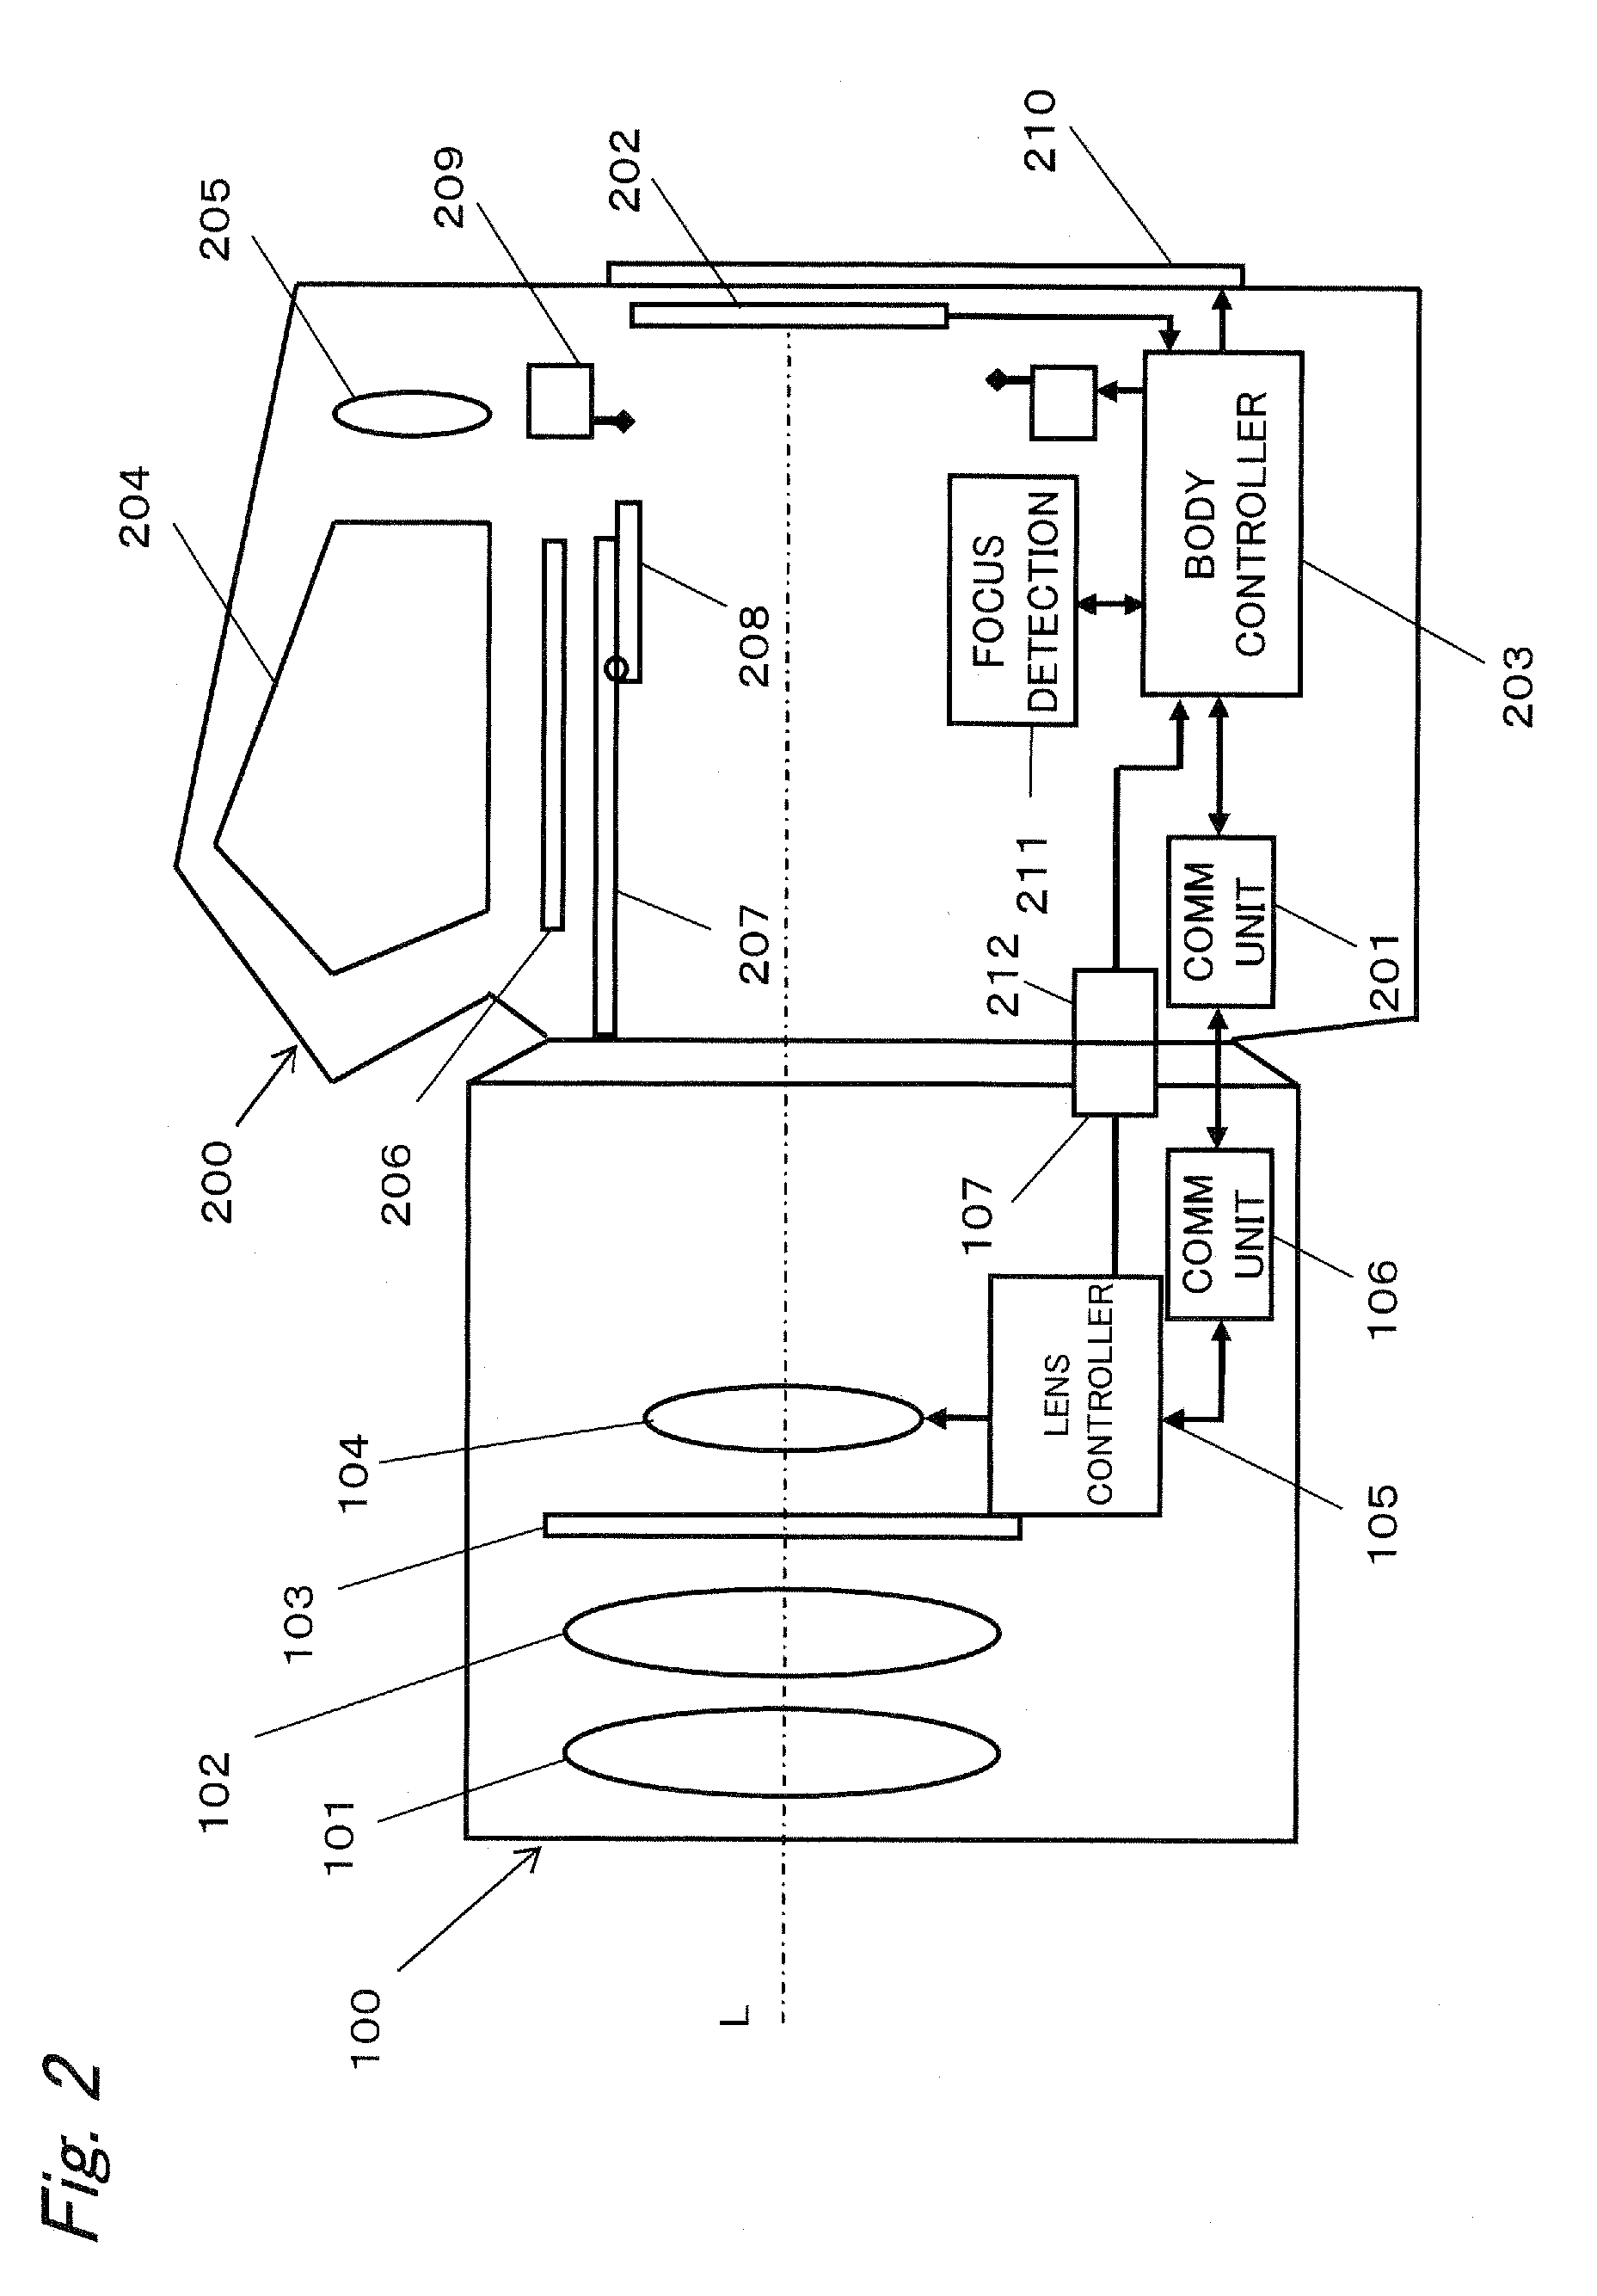 Imaging system, camera body and interchangeable lens